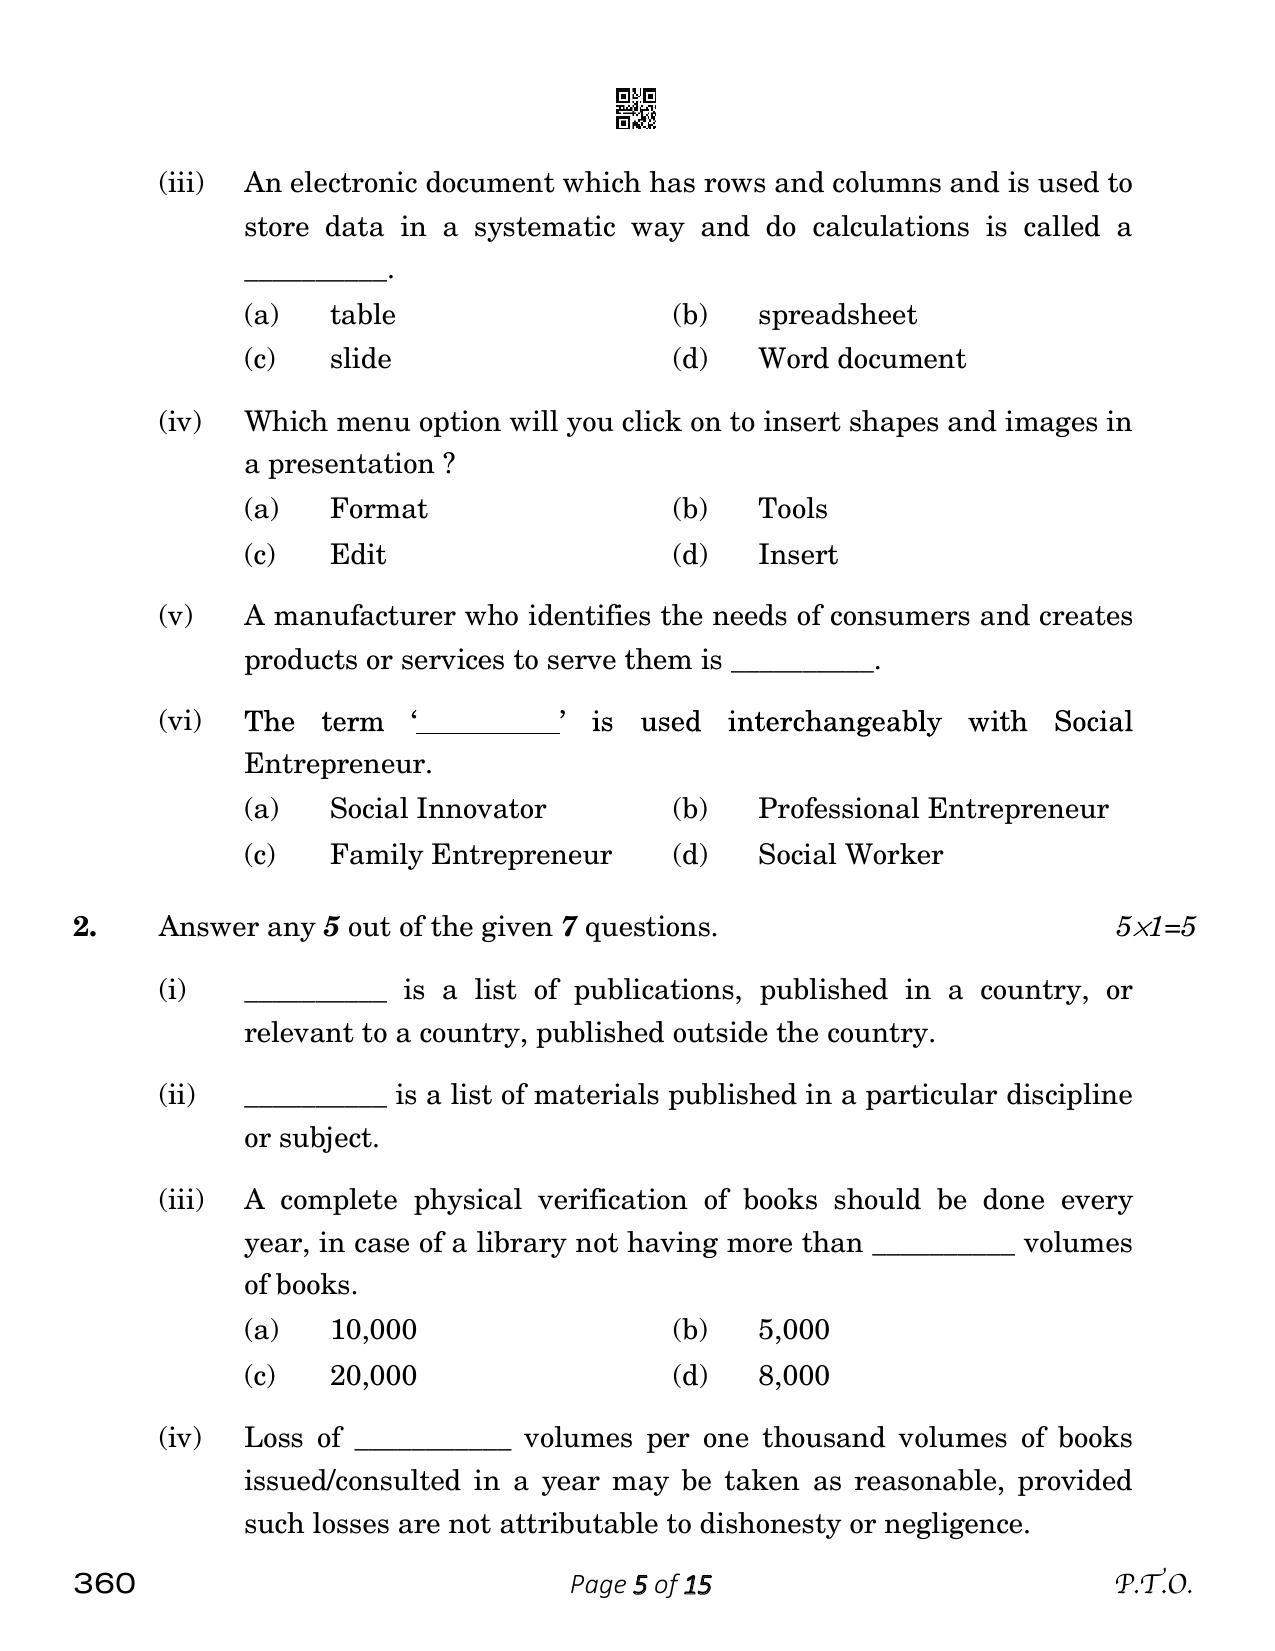 CBSE Class 12 Library And Information Science (Compartment) 2023 Question Paper - Page 5